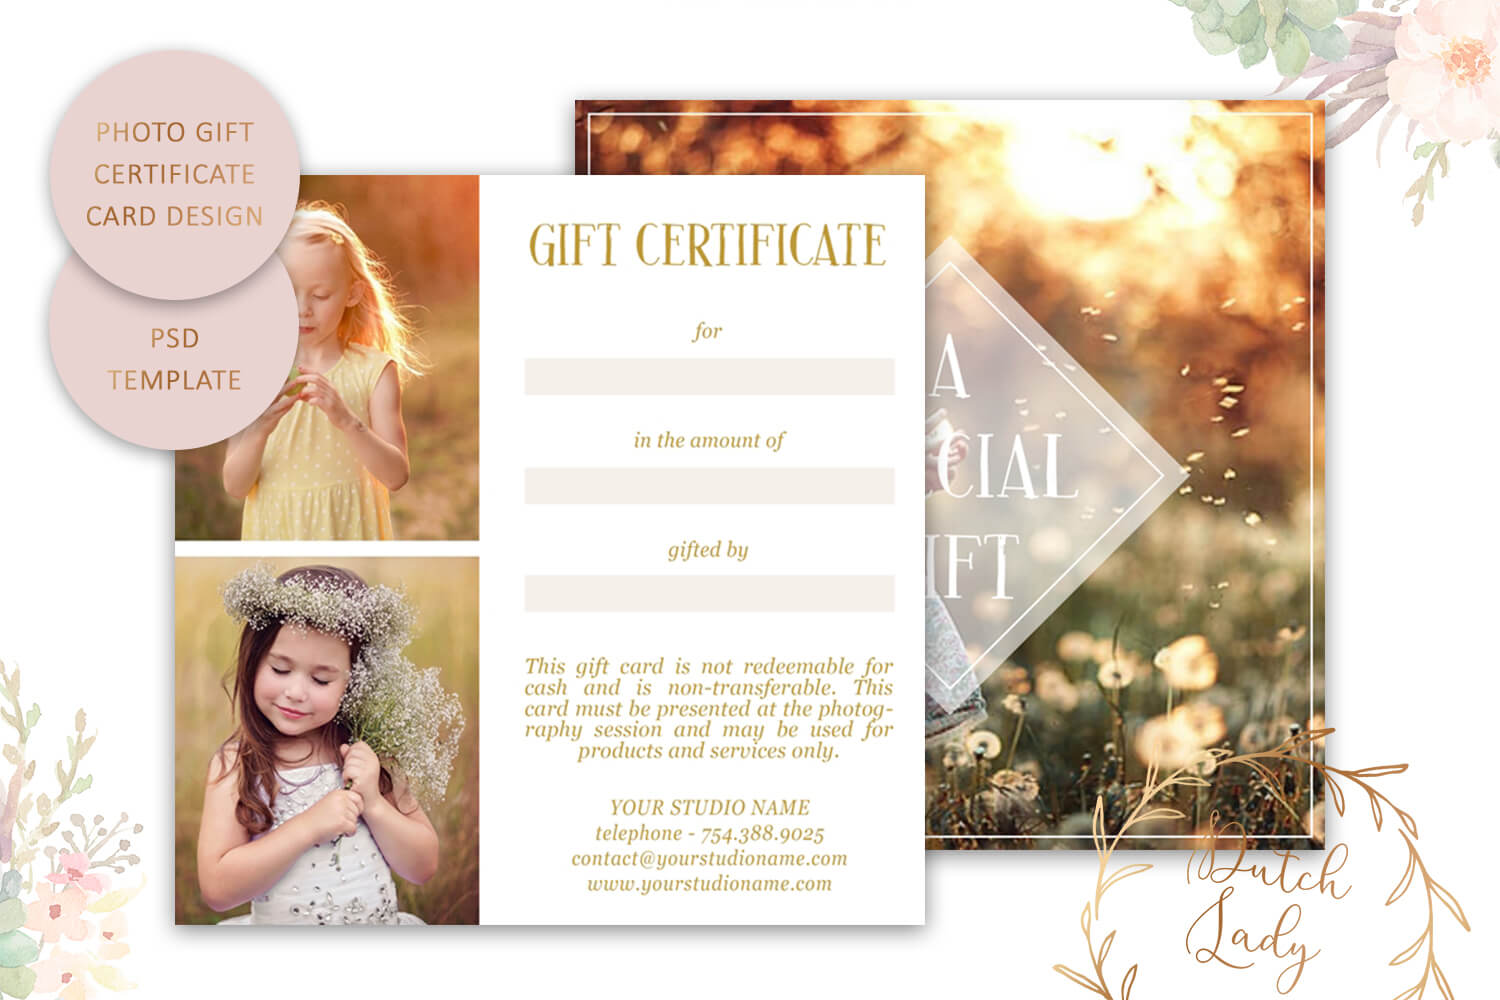 Photography Gift Certificate Card – Adobe Photoshop .psd Template #11 In Gift Certificate Template Photoshop